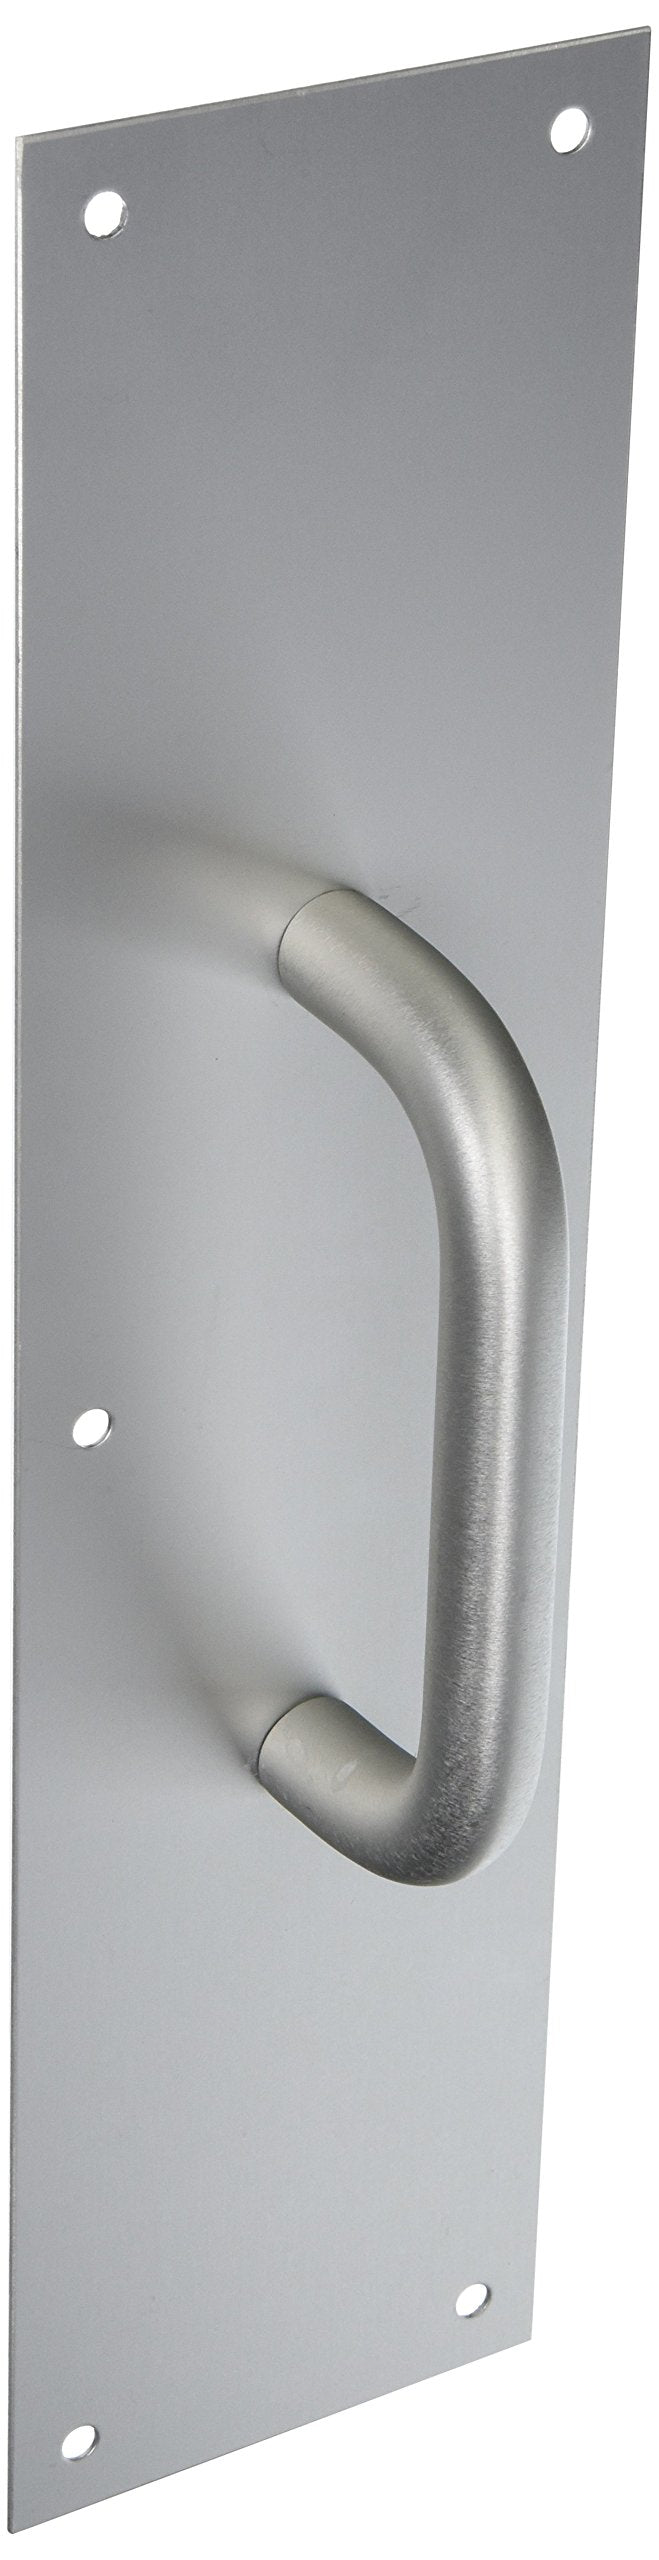 Rockwood 102 X 70C.28 Aluminum Pull Plate, 16" Height x 4" Width x 0.050" Thick, 5-1/2" Center-to-Center Handle Length, 5/8" Pull Diameter, Clear Anodized Finish